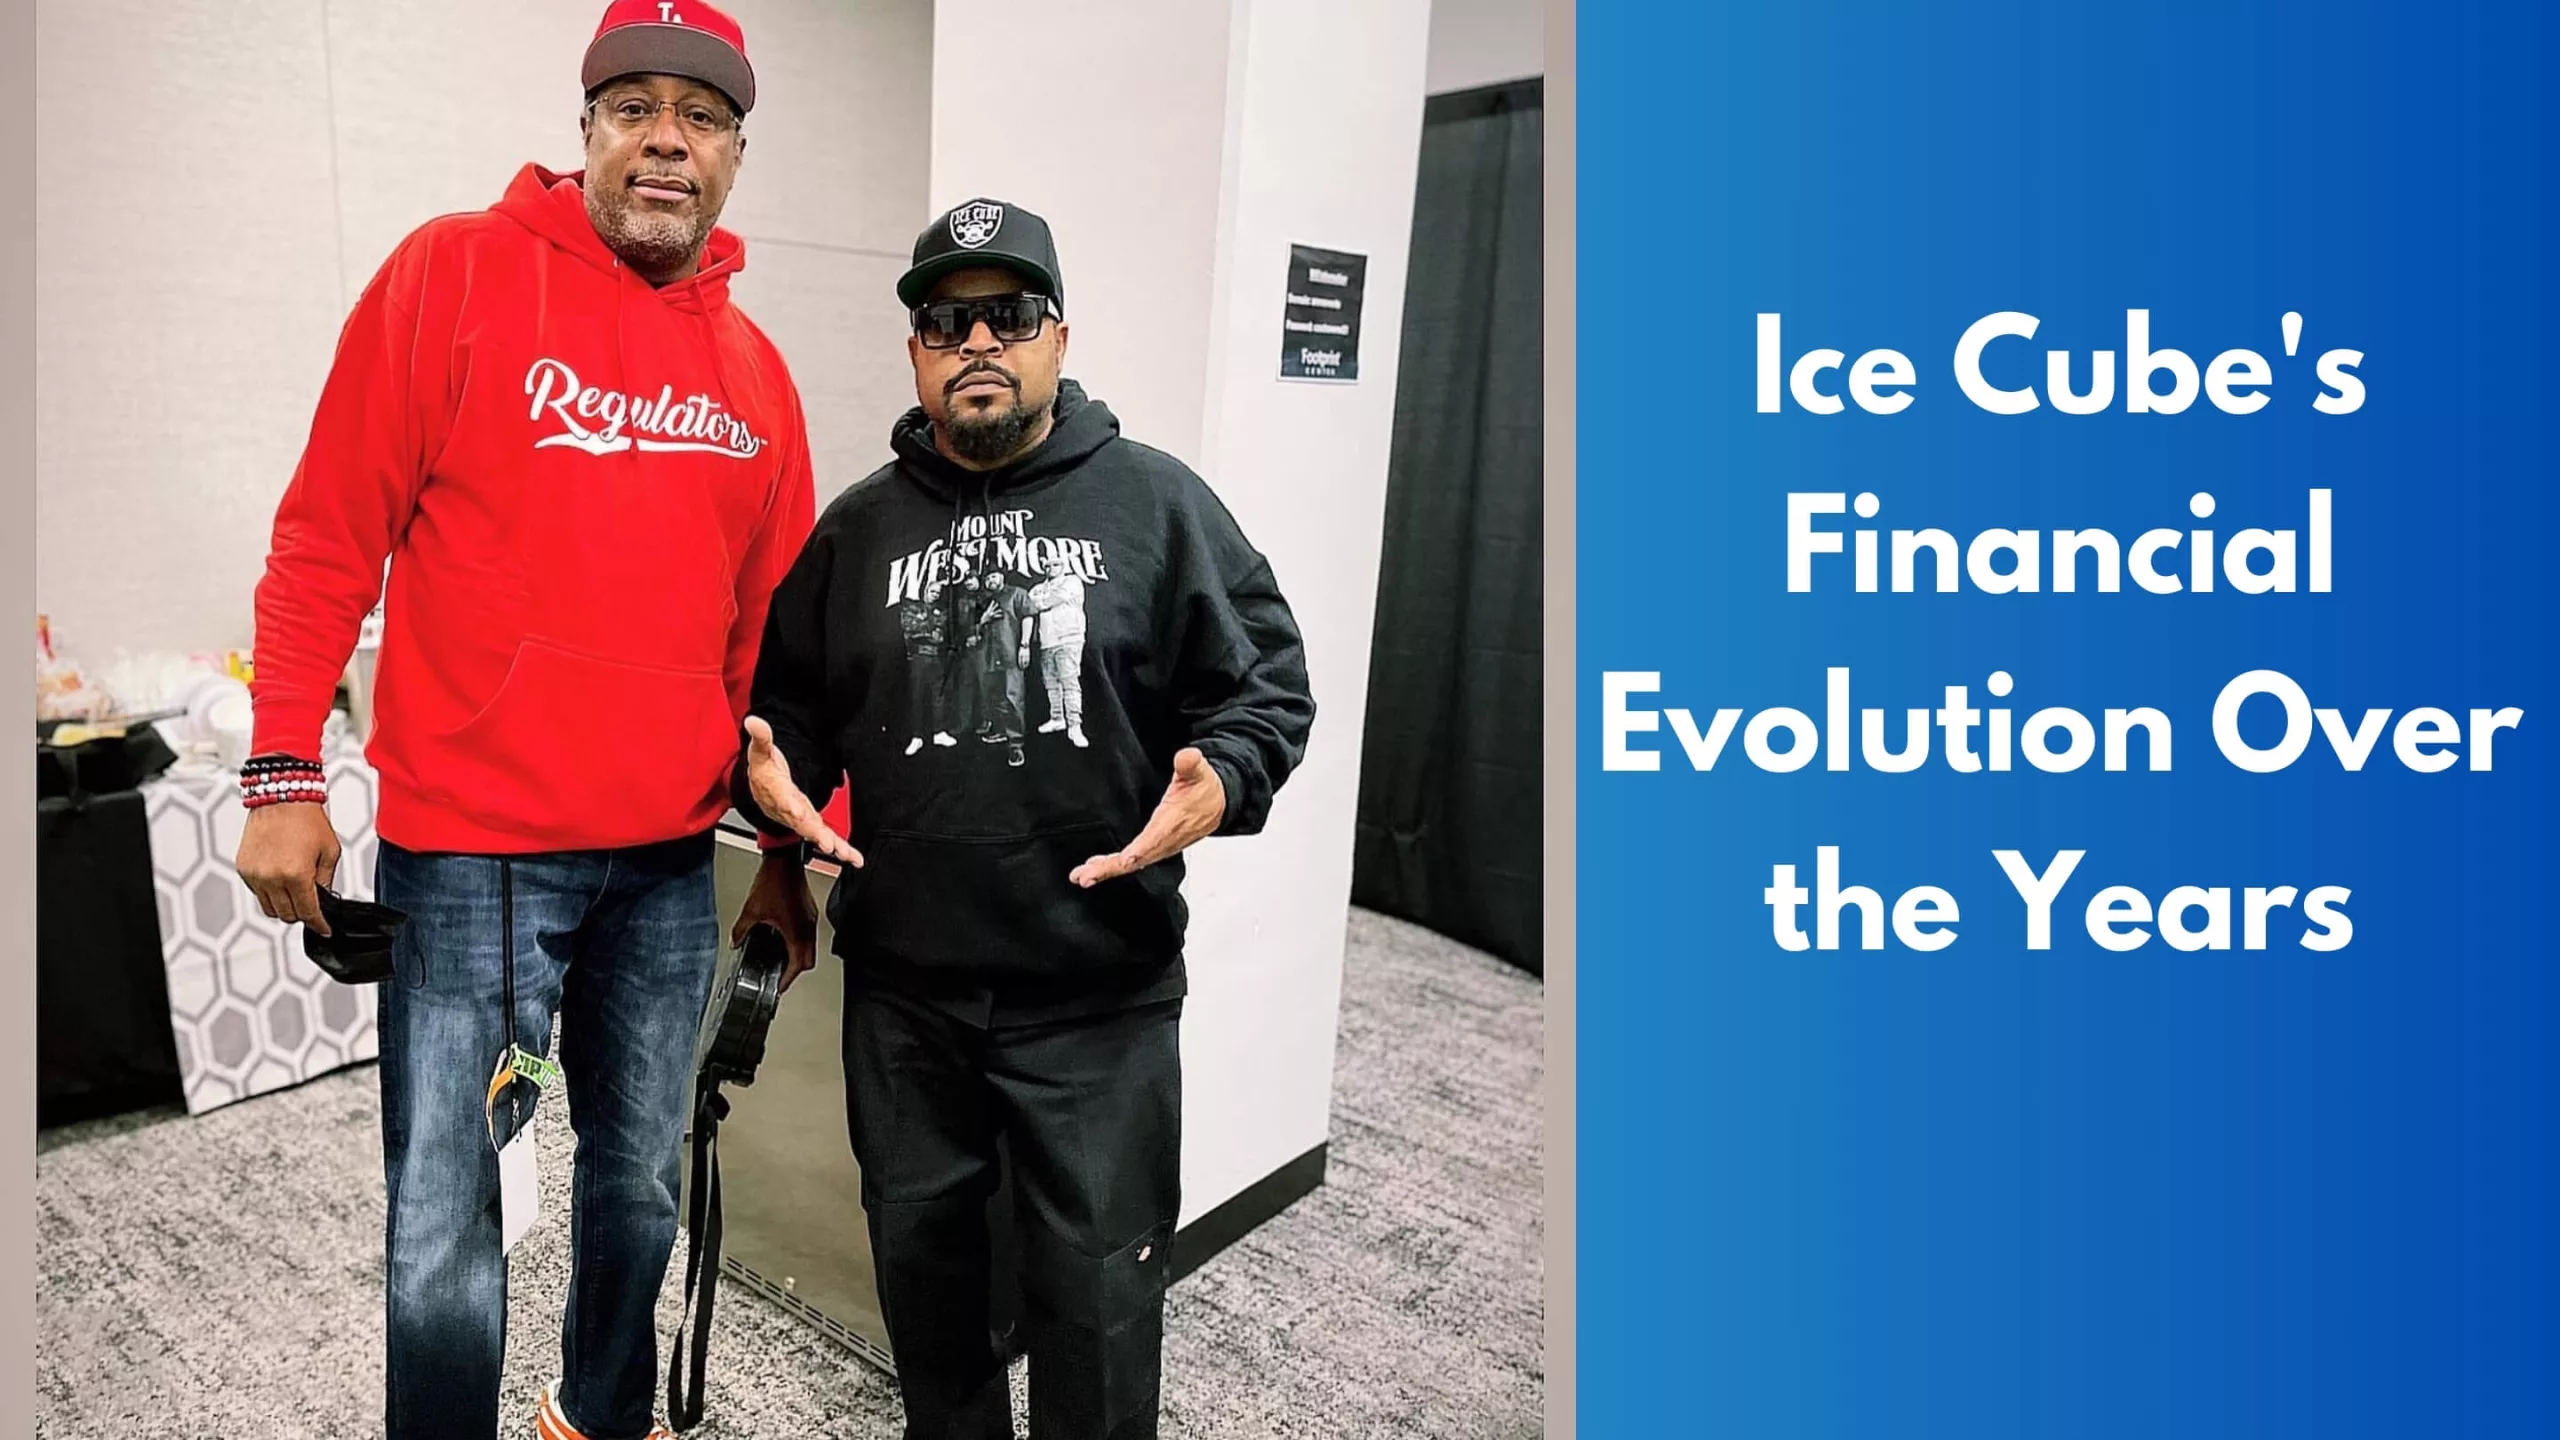 Ice Cube's Financial Evolution Over the Years